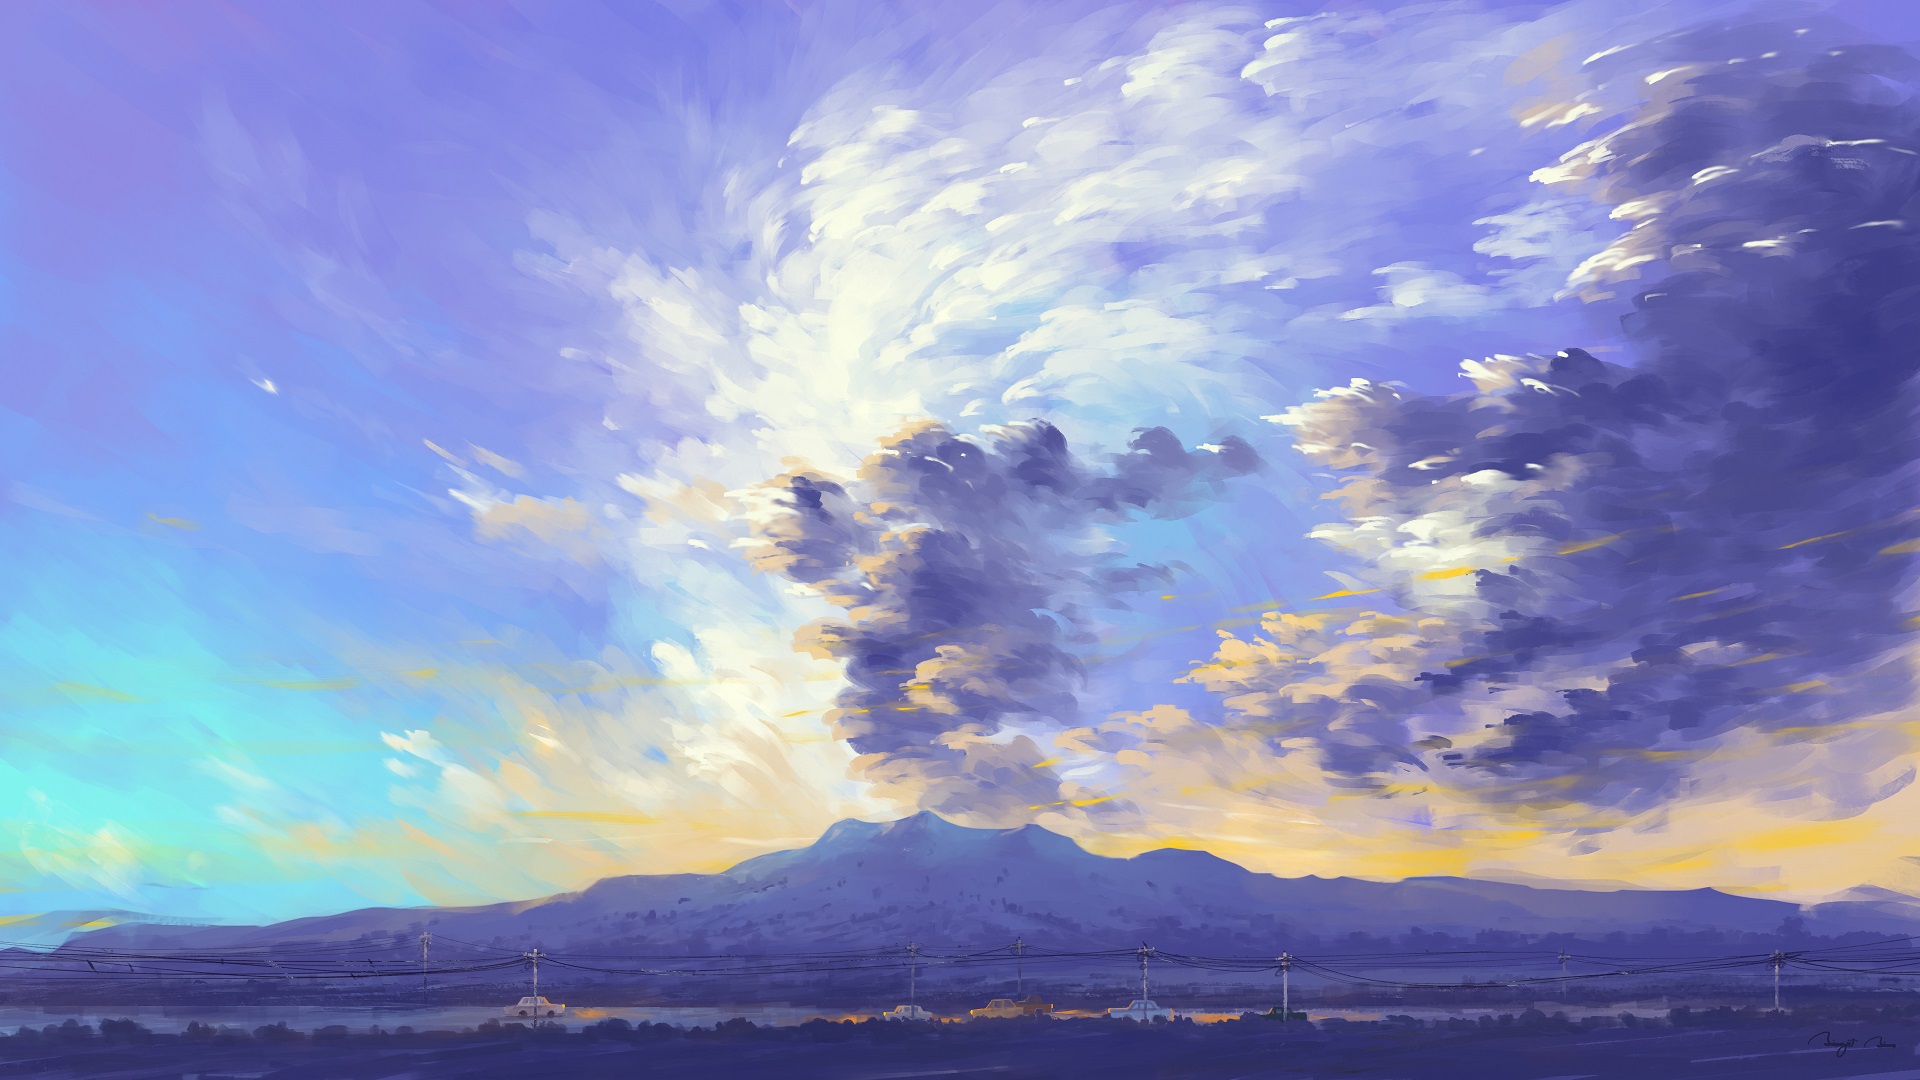 Landscape Clouds Sunset Mountains Digital Painting BisBiswas 1920x1080